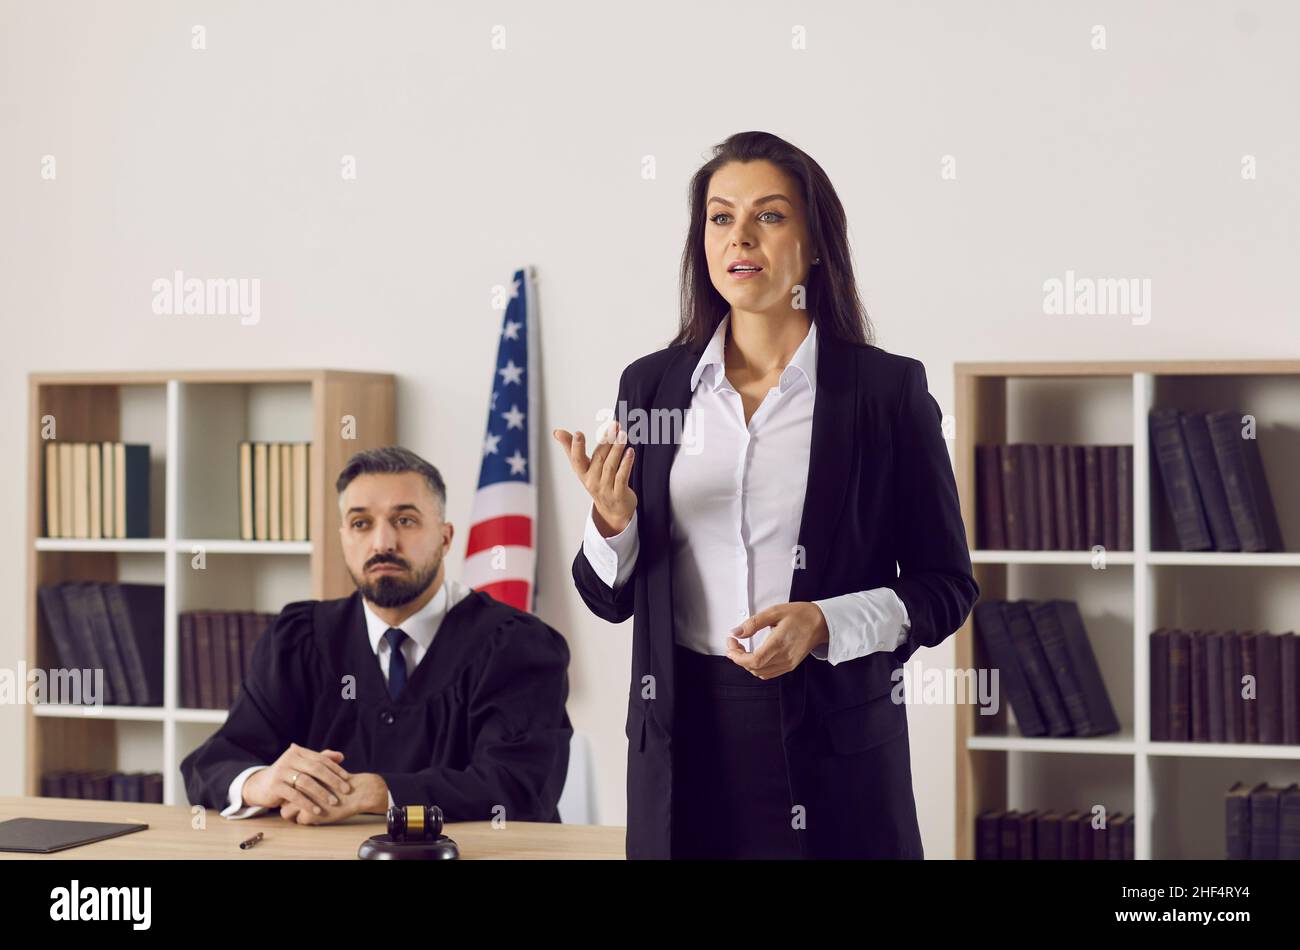 Defense attorney who represents defendant in lawsuit making speech during court trial Stock Photo